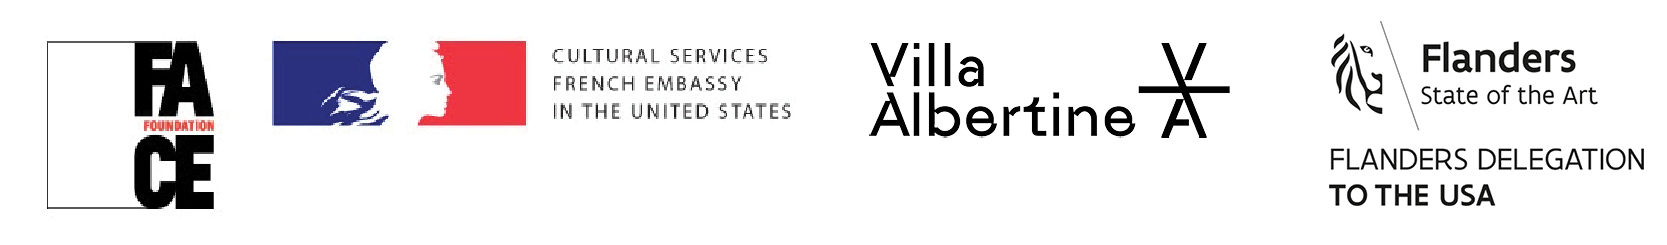 Logos: FACE Foundation, Cultural Services of the French Embassy in the United States & Villa Albertine & Flanders State of the Art: Flanders Delegation to the USA